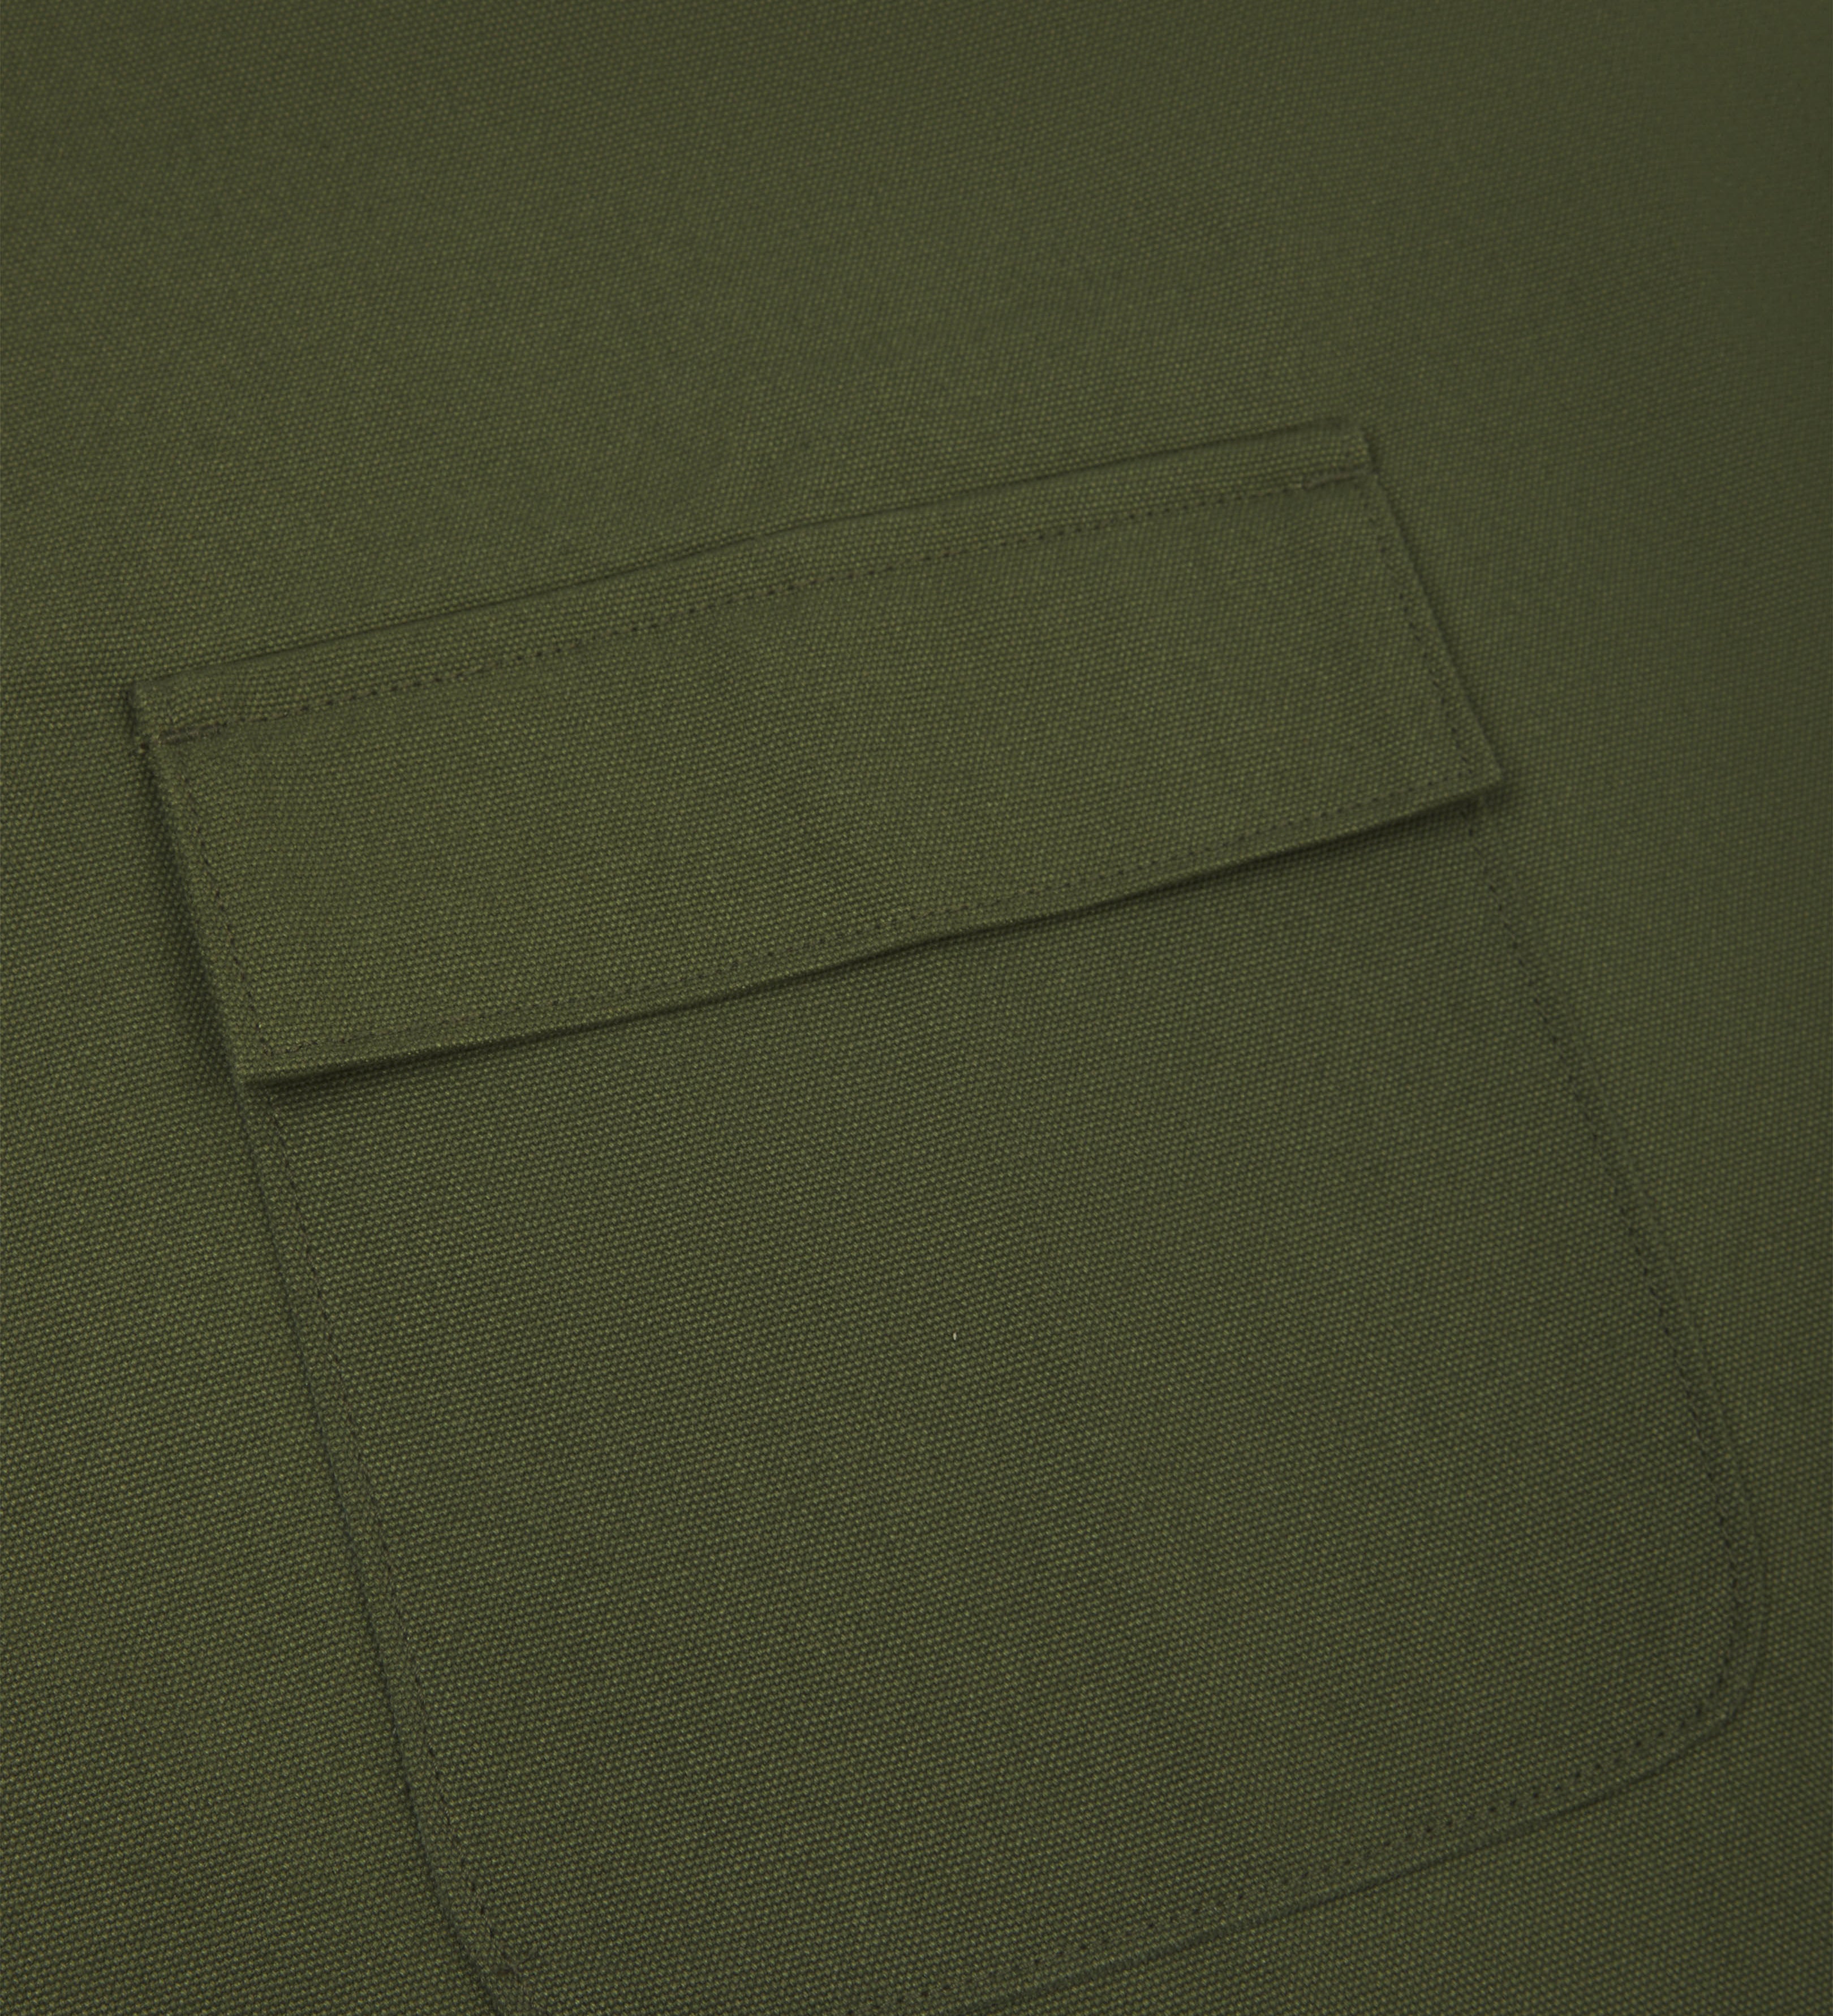 Close up shot of uskees green canvas apron showing front flap pocket